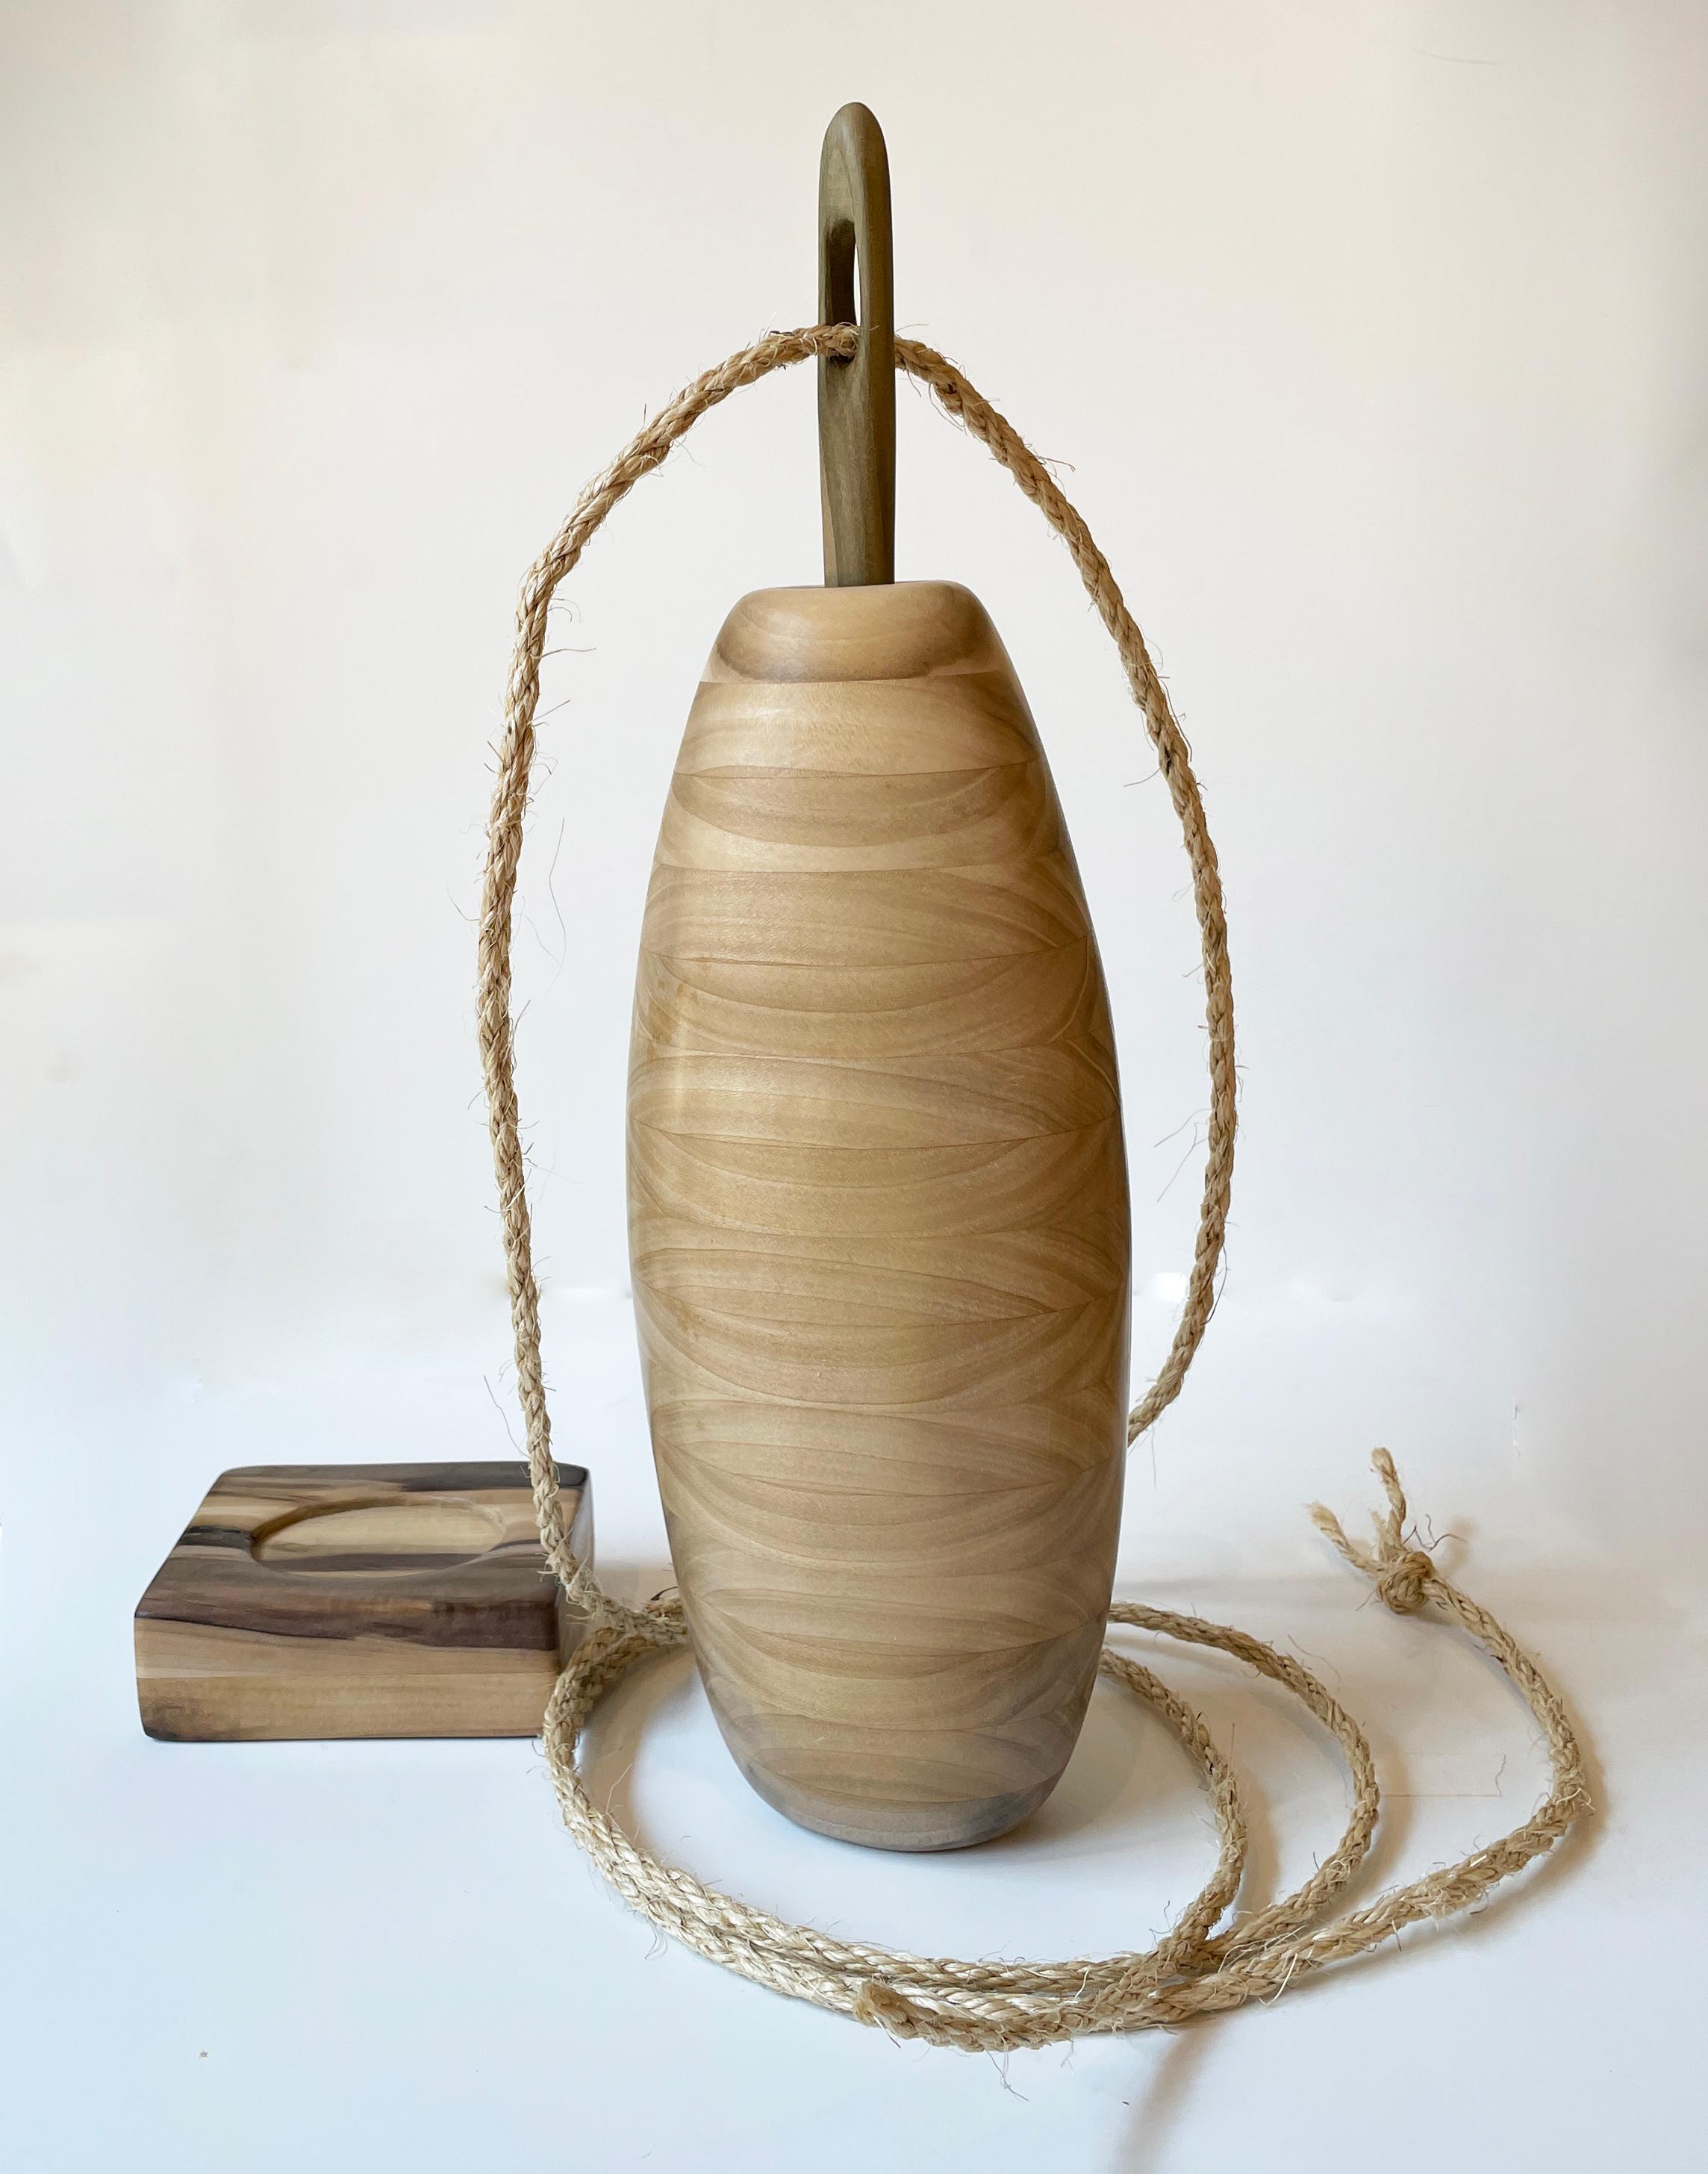 Sewn Dialog, Poplar Wood Sculpture, Vessel with Wooden Needle  - Brown Abstract Sculpture by Mark Bowers